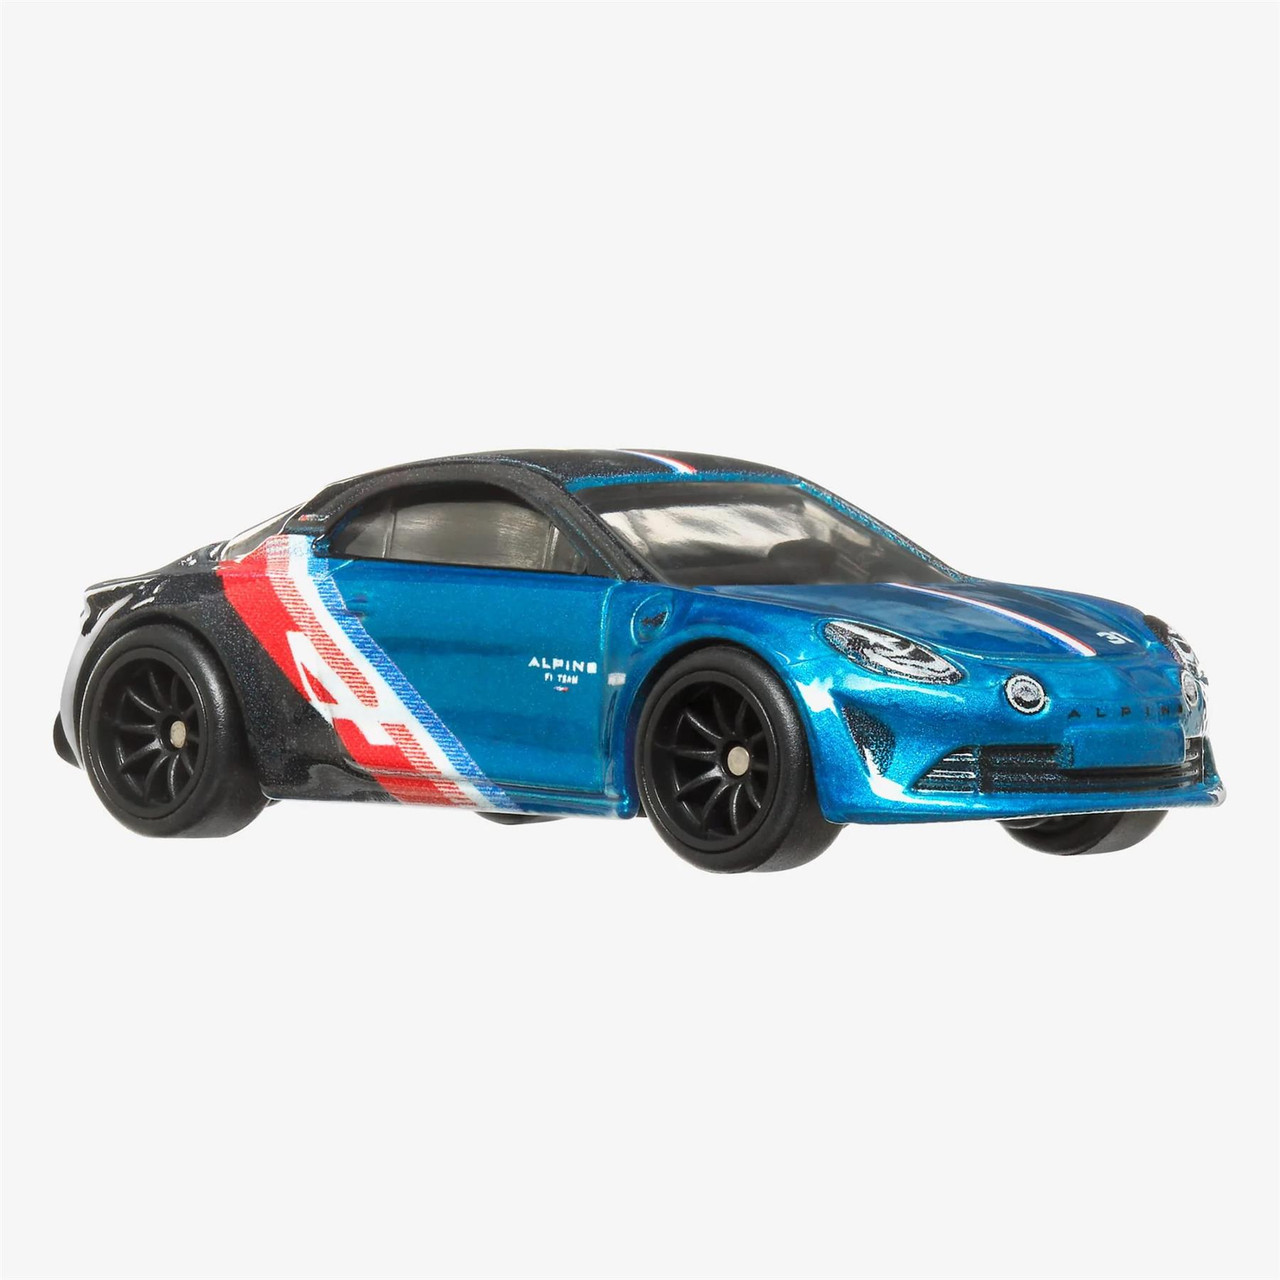 Hot Wheels Car Culture ALPINE A110 1:64 Scale Die-cast Vehicle (AutoStrasse  #5/5) - The Toy Barn